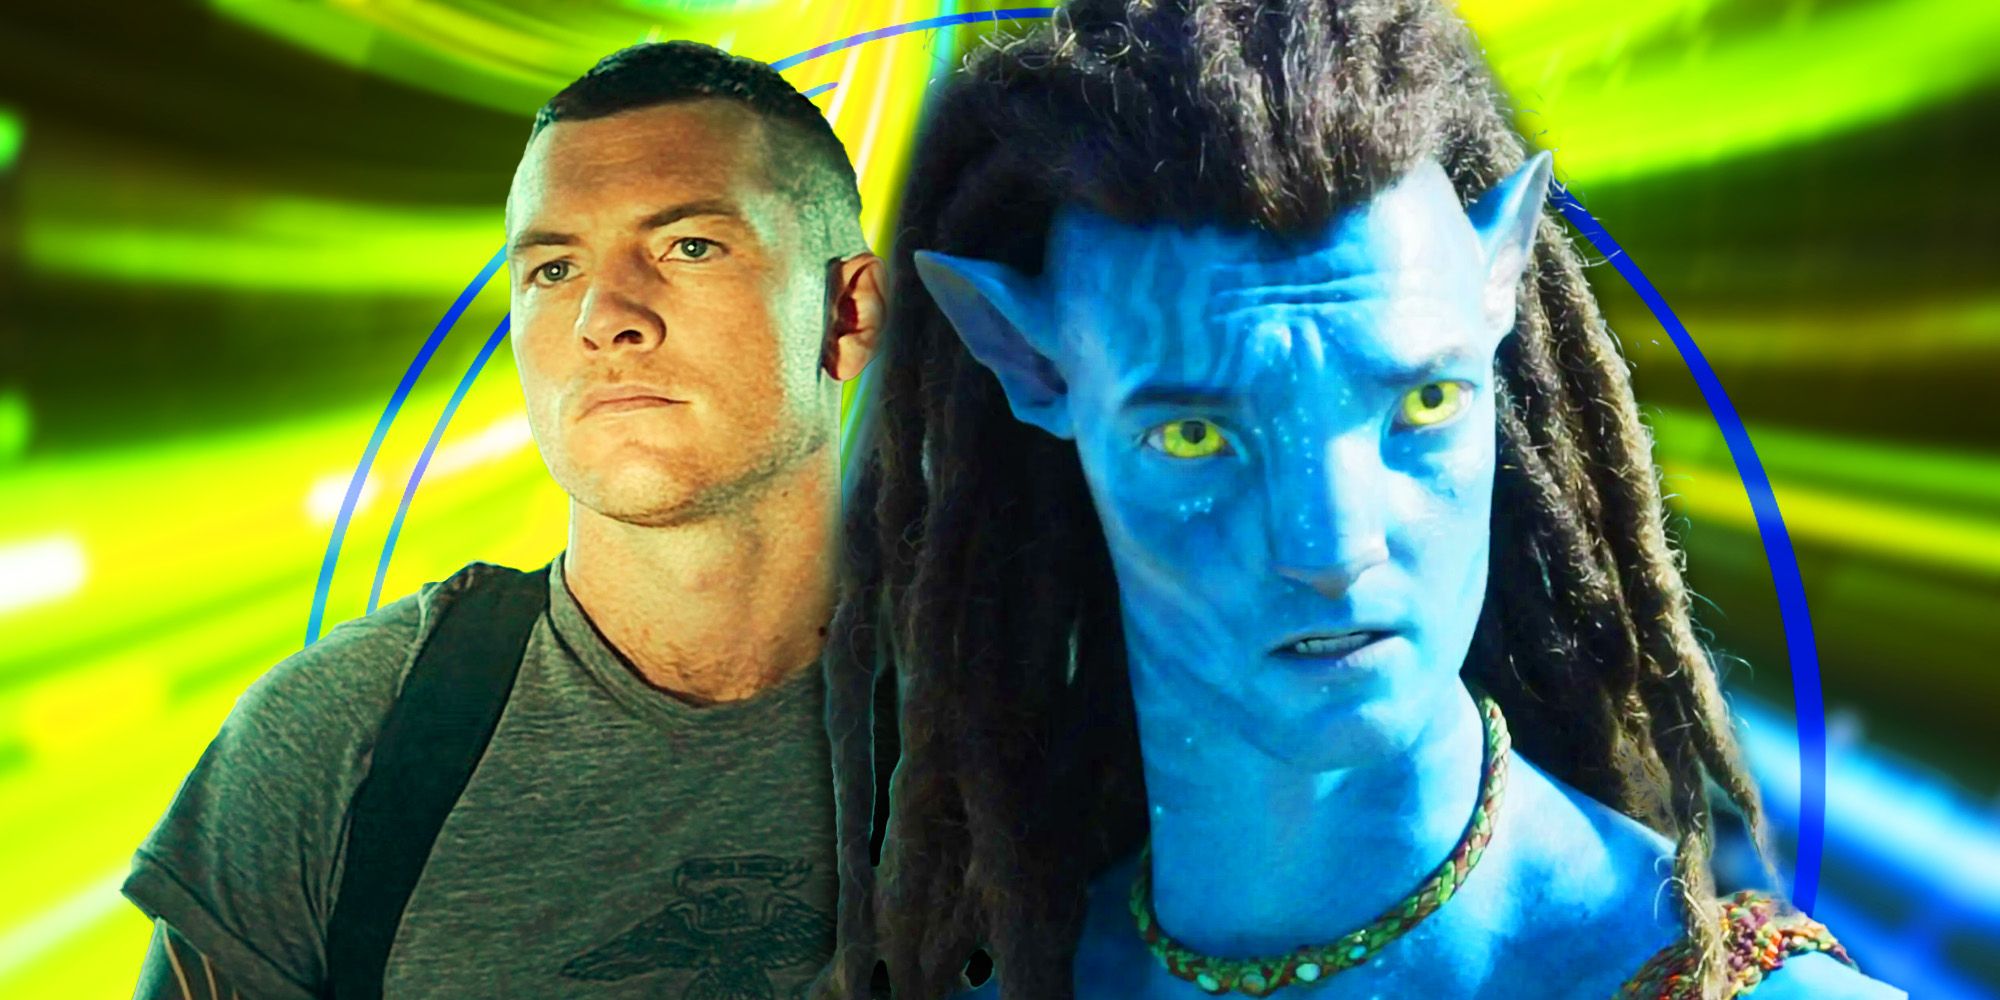 Jake Sully in Na'vi and Human form from Avatar